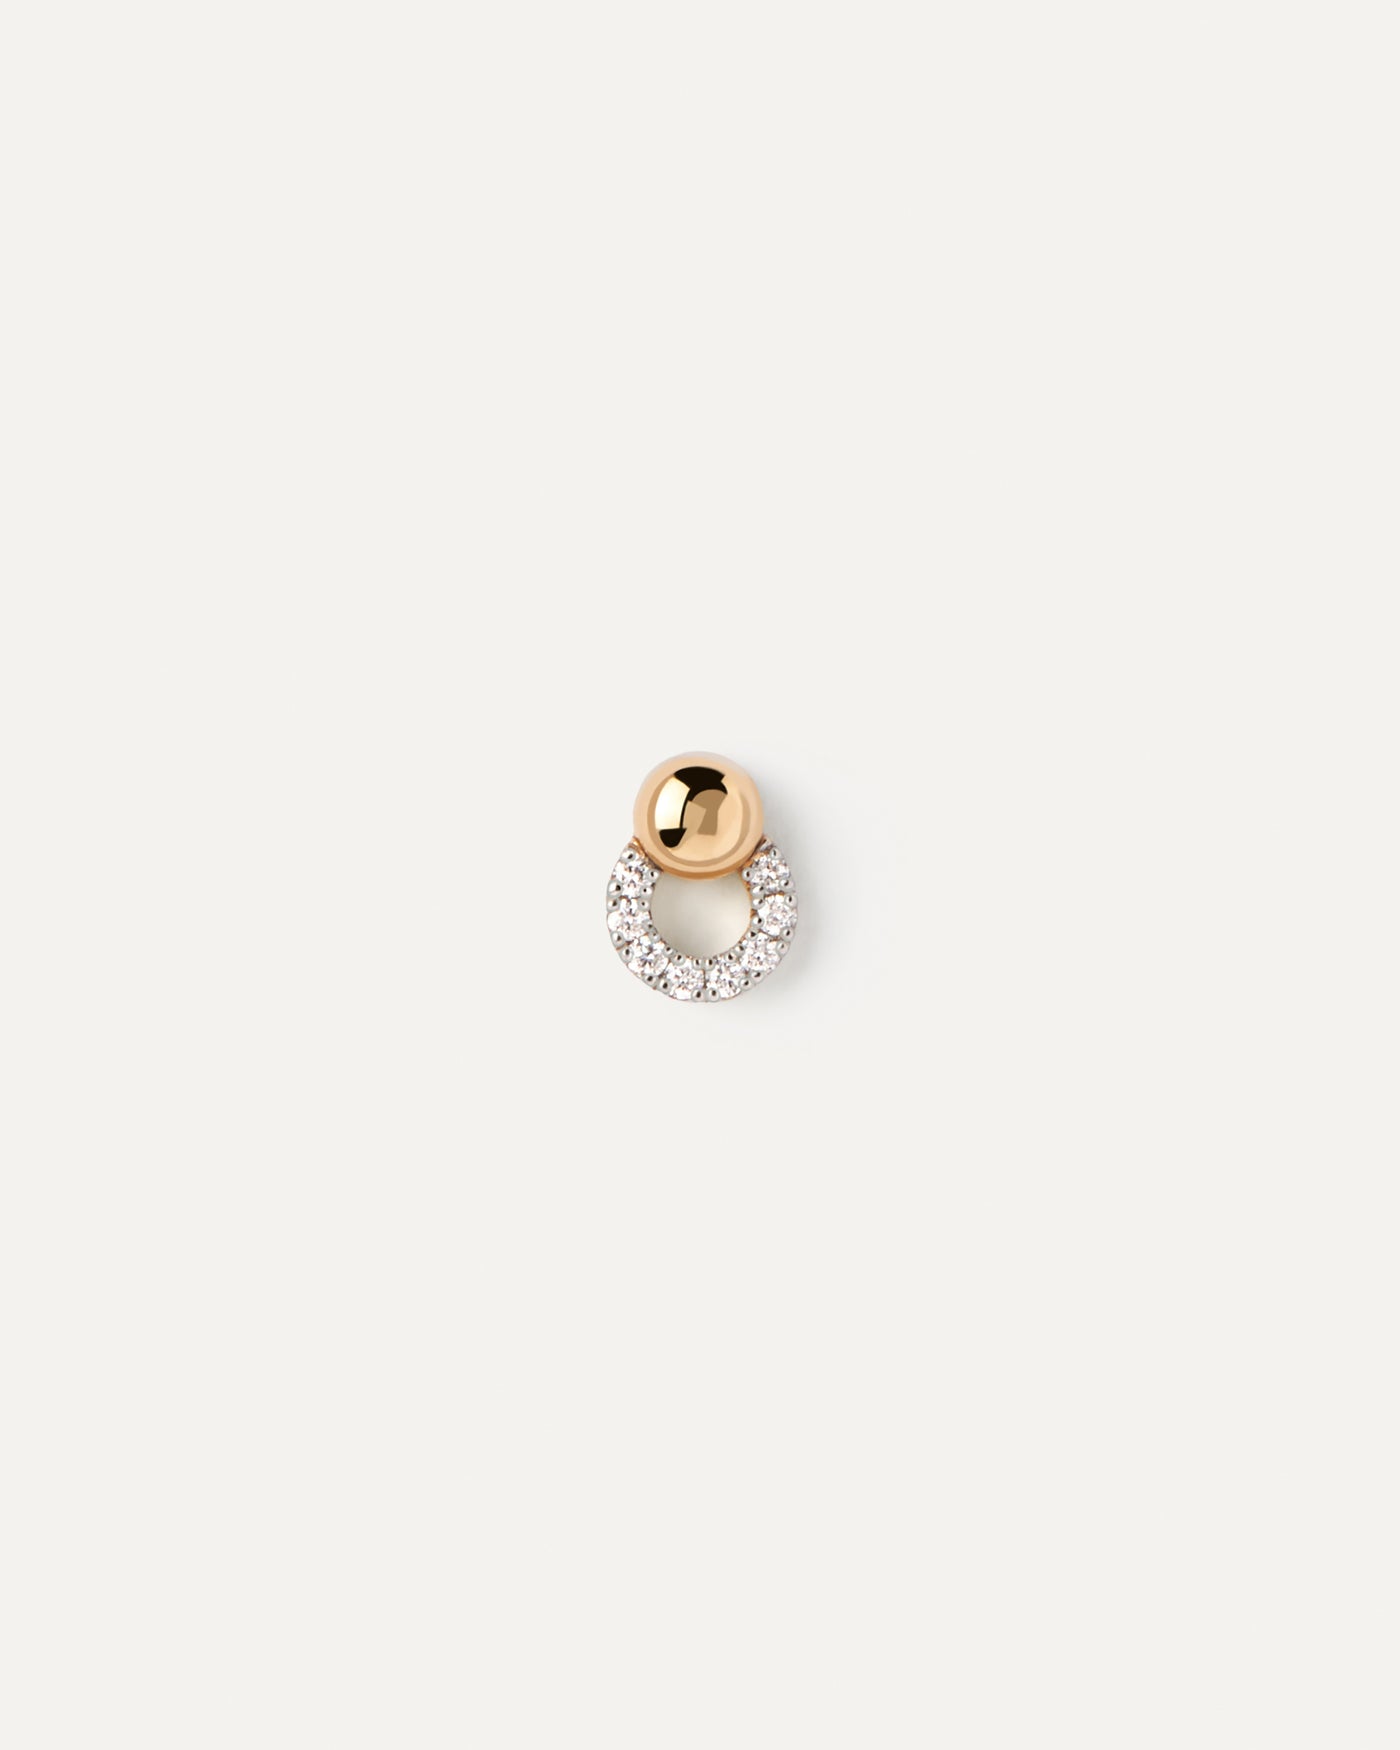 Diamonds and gold Loop single earring. Dainty ear piercing in solid yellow gold with a circular pendant set with eight lab-grown diamonds. Get the latest arrival from PDPAOLA. Place your order safely and get this Best Seller.